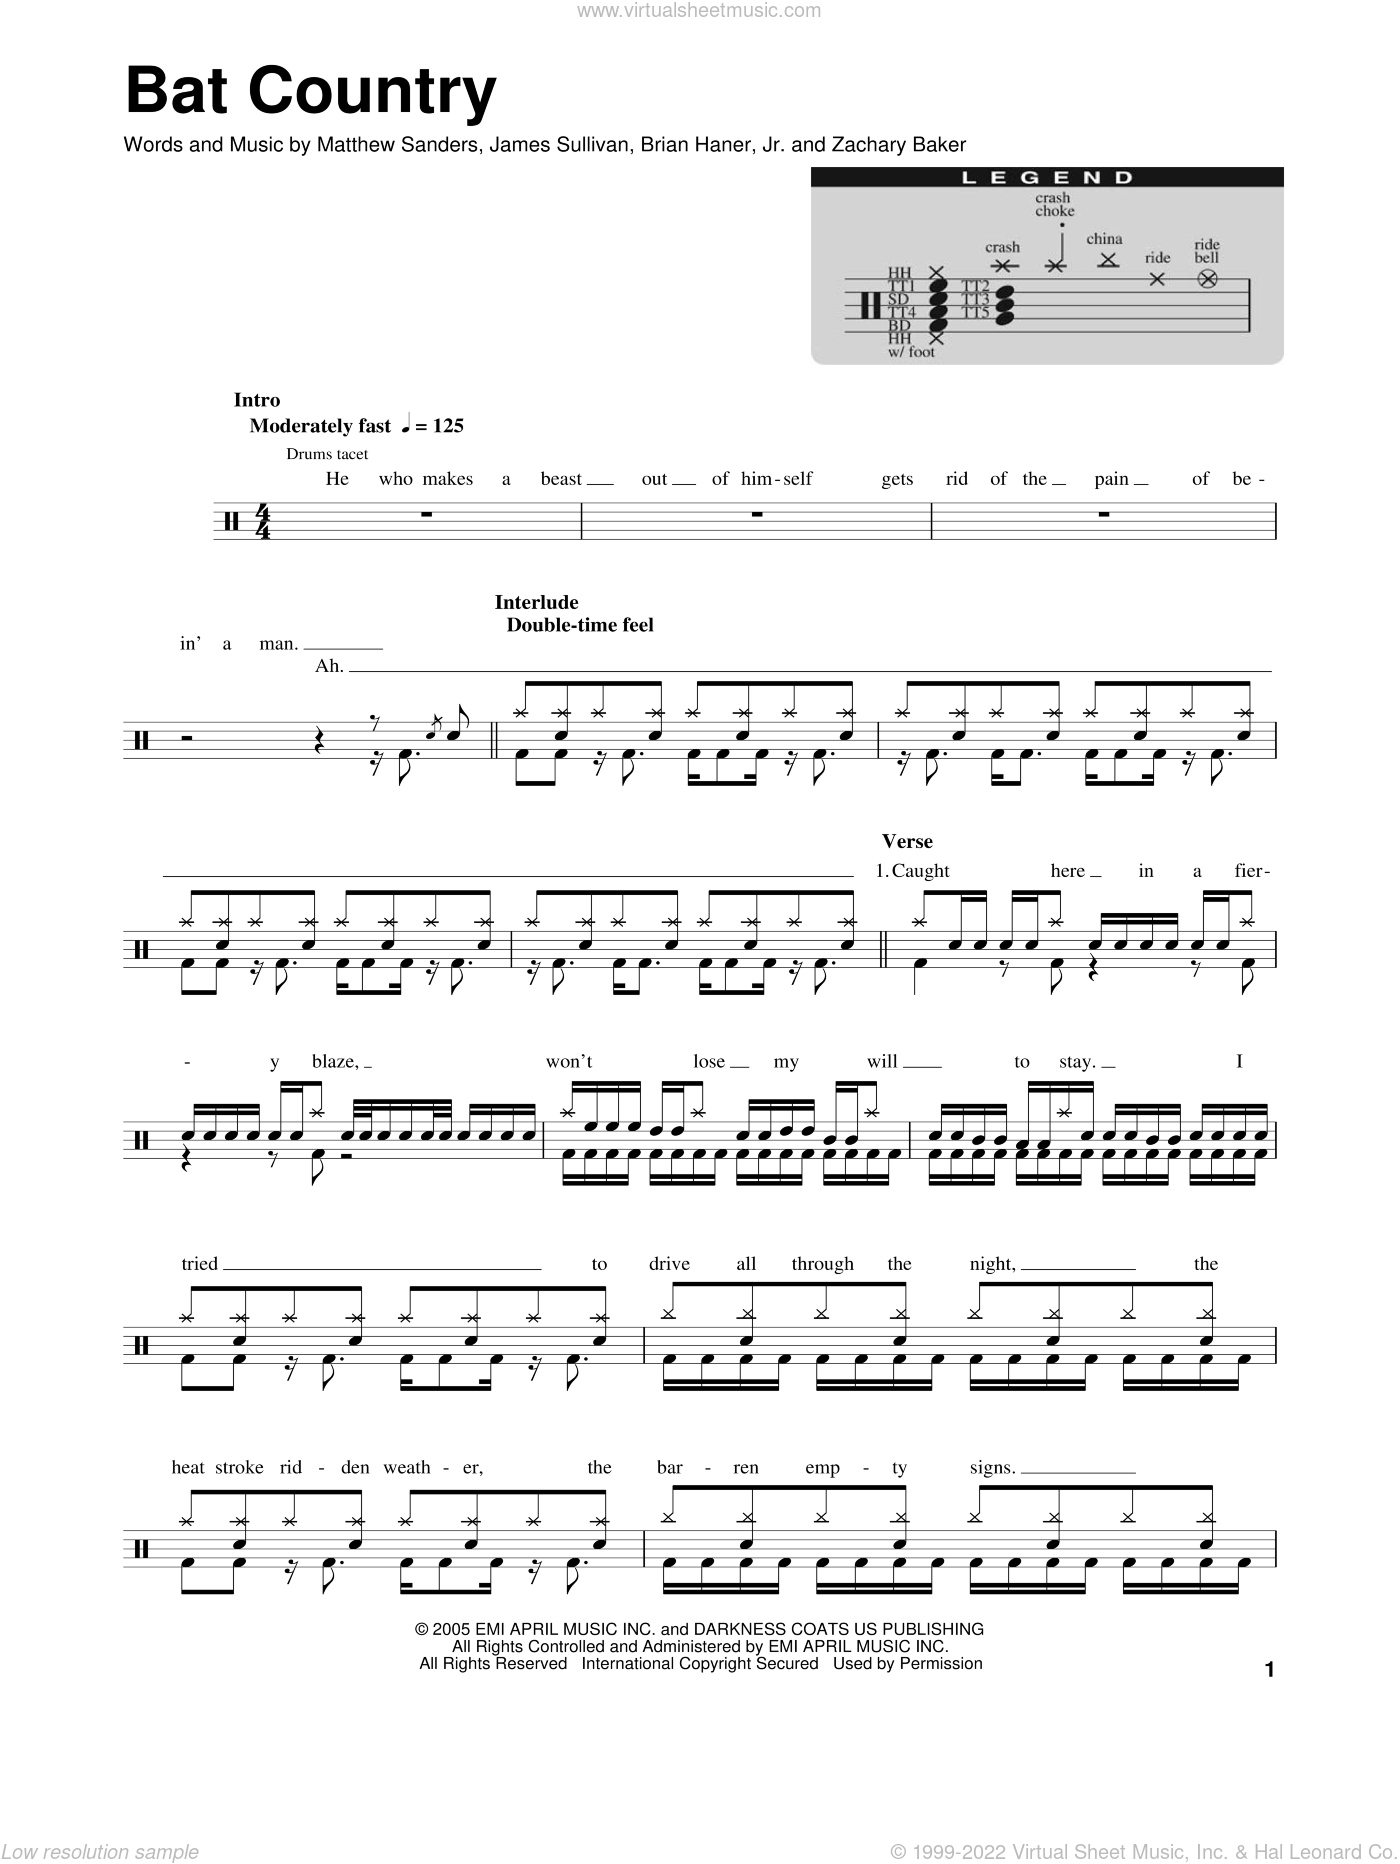 Afterlife – Avenged Sevenfold Sheet music for Piano, Violin (Solo)